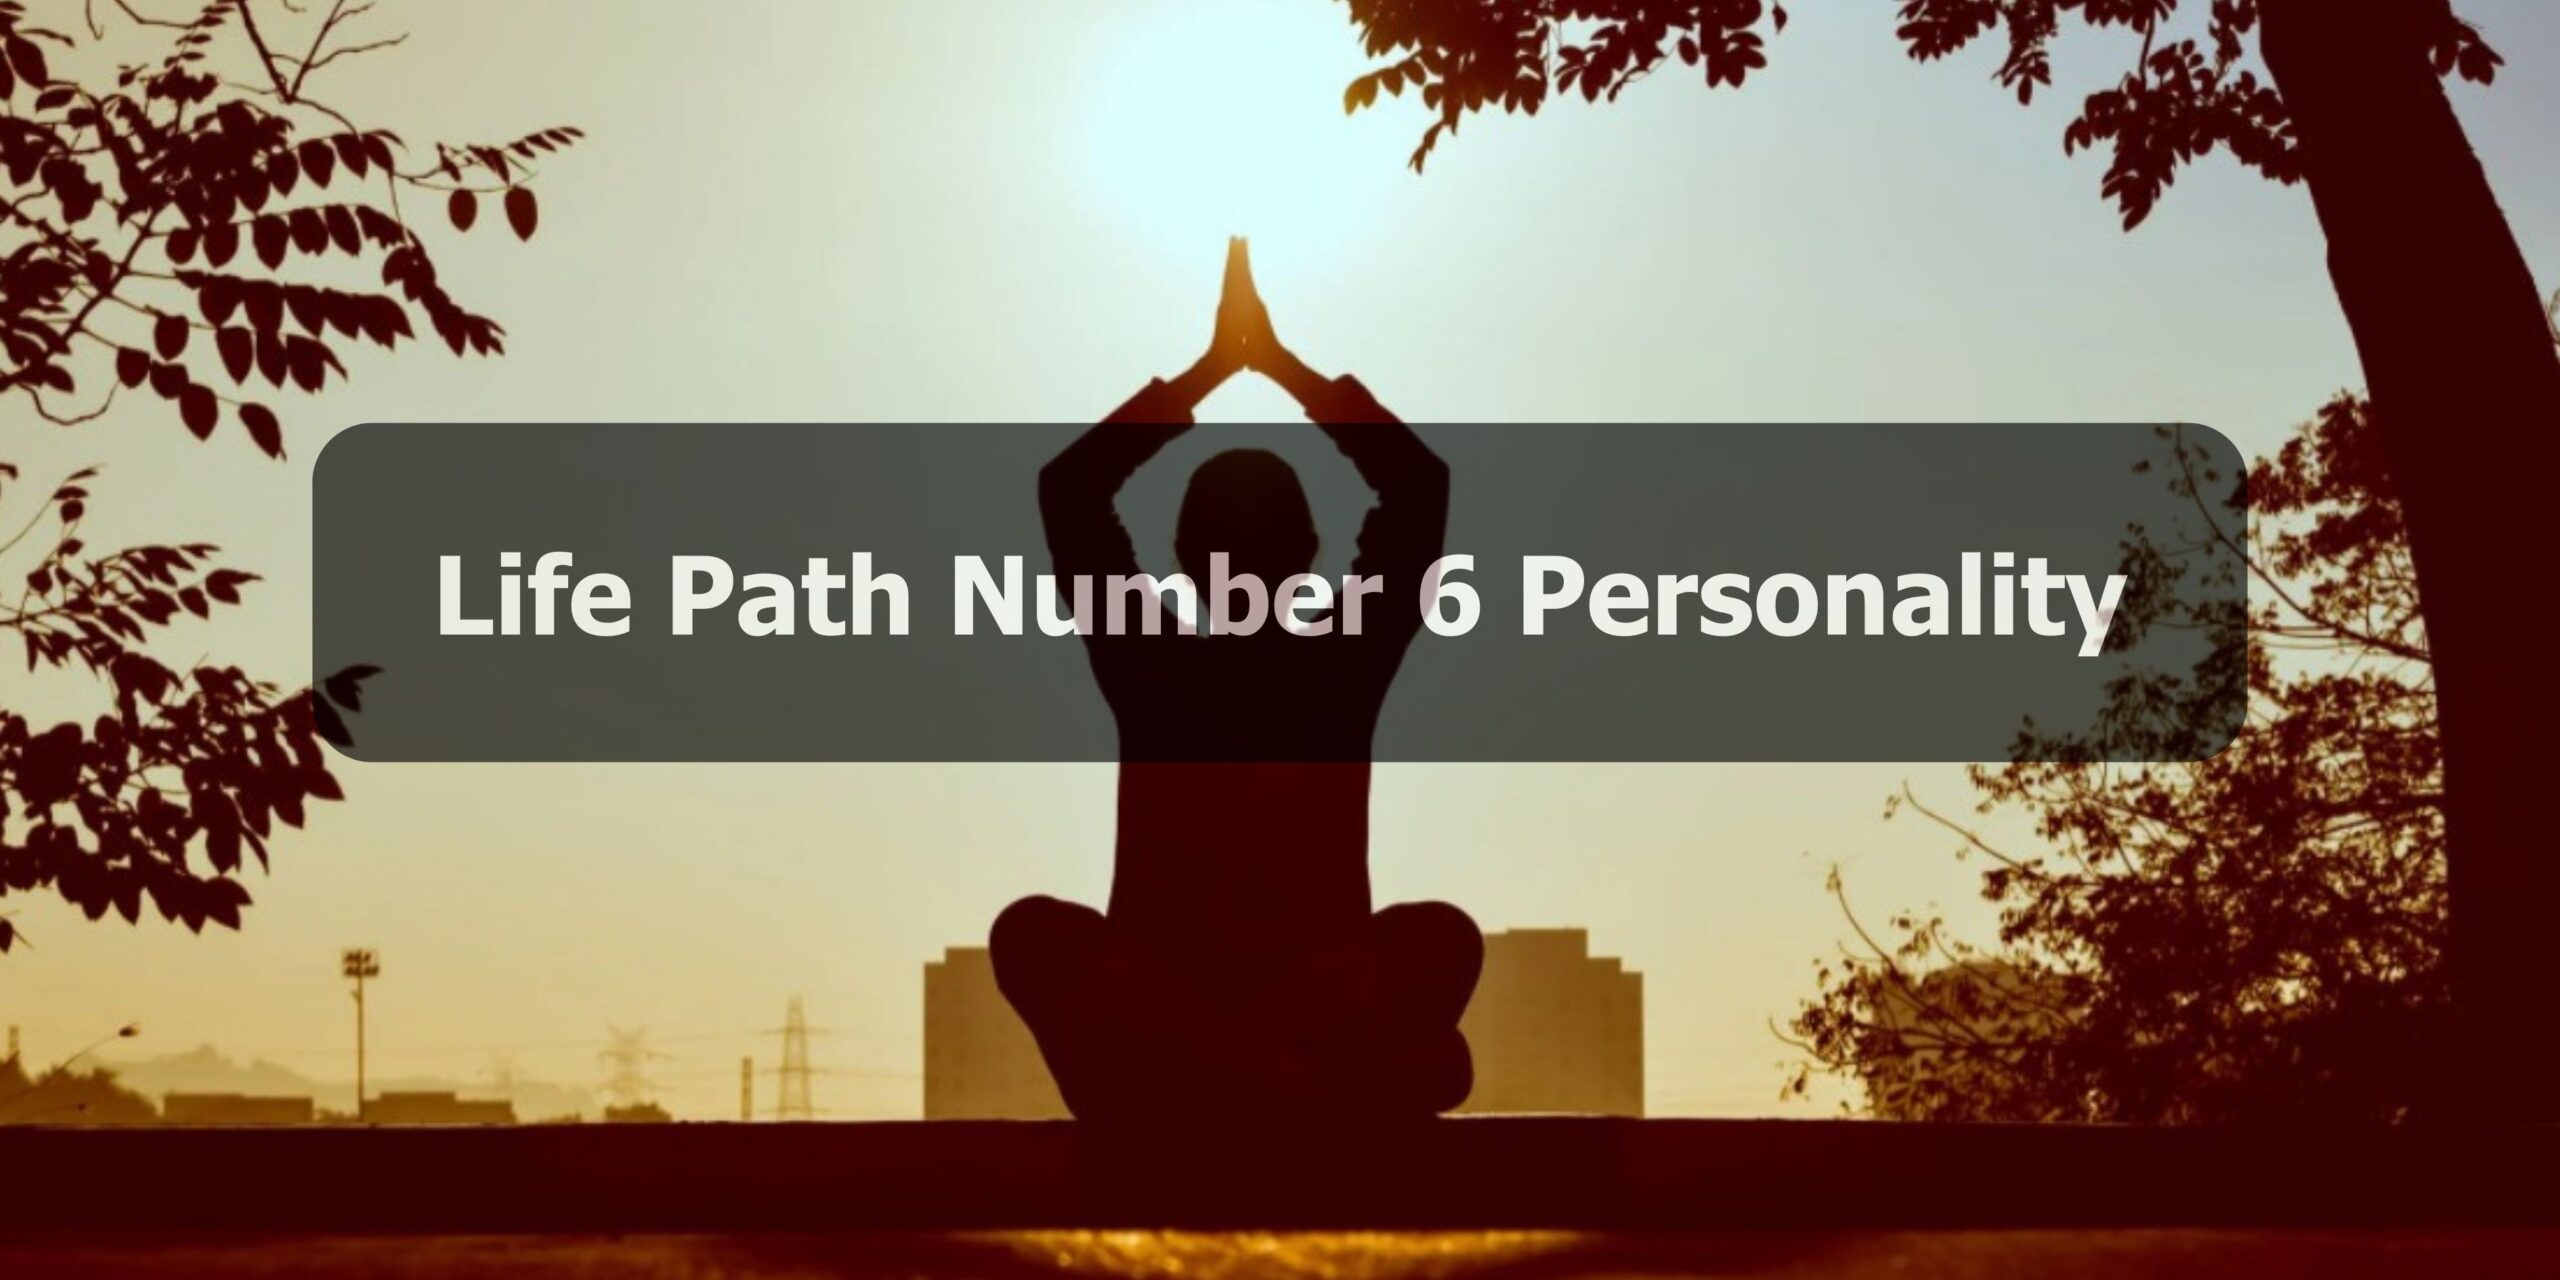 Life Path Number 6 Personality